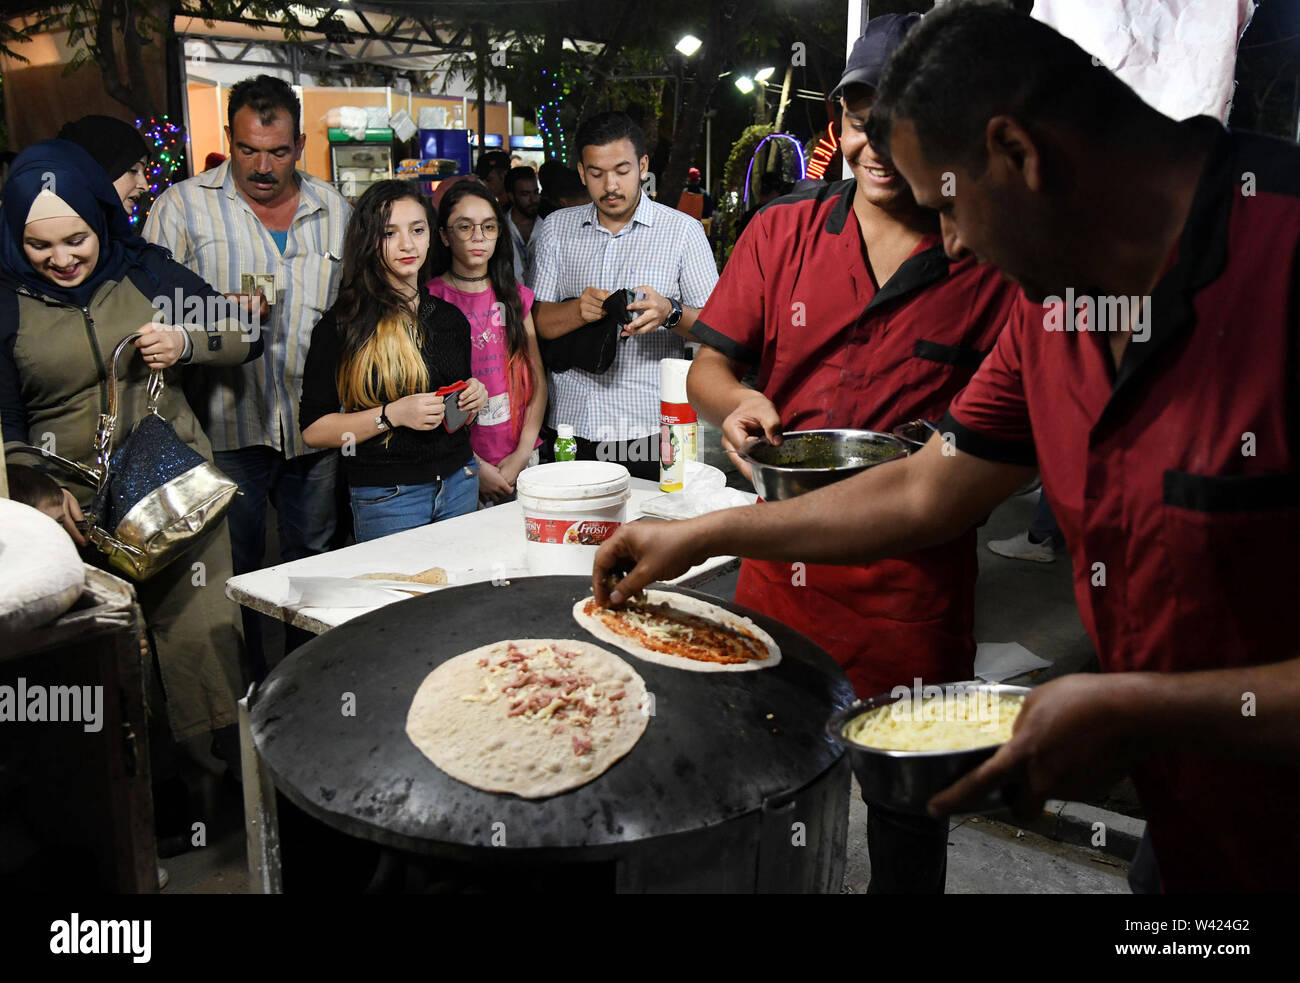 Damascus, Syria. 18th July, 2019. Syrians wait for food during an entertainment festival called 'Sham (Damascus) Gathers Us' in Damascus, Syria, July 18, 2019. The festival included folkloric performances, children games and food tasting. Credit: Ammar Safarjalani/Xinhua/Alamy Live News Stock Photo